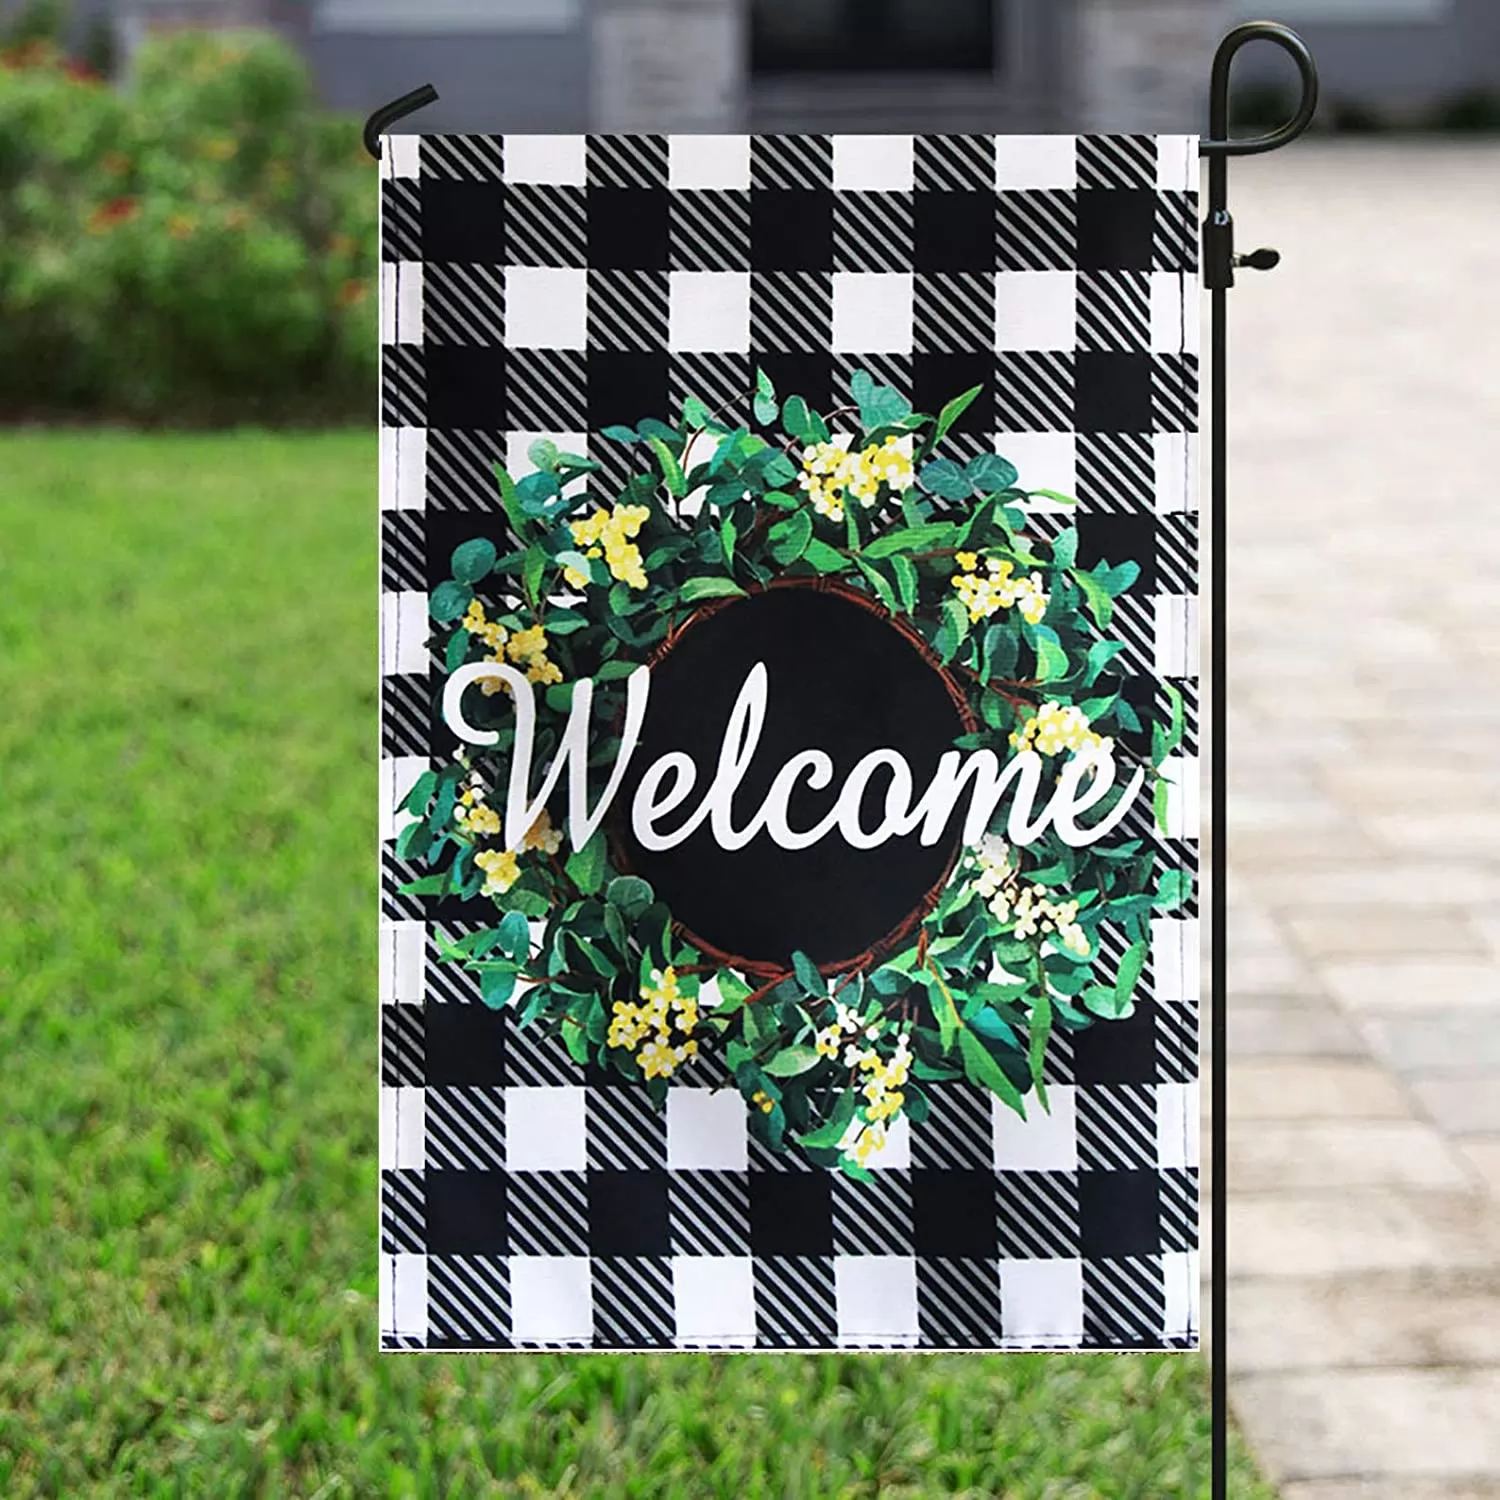 Floral Garden Flag Vertical Double Sided Welcome Flag for Home Garden Yard NS89 